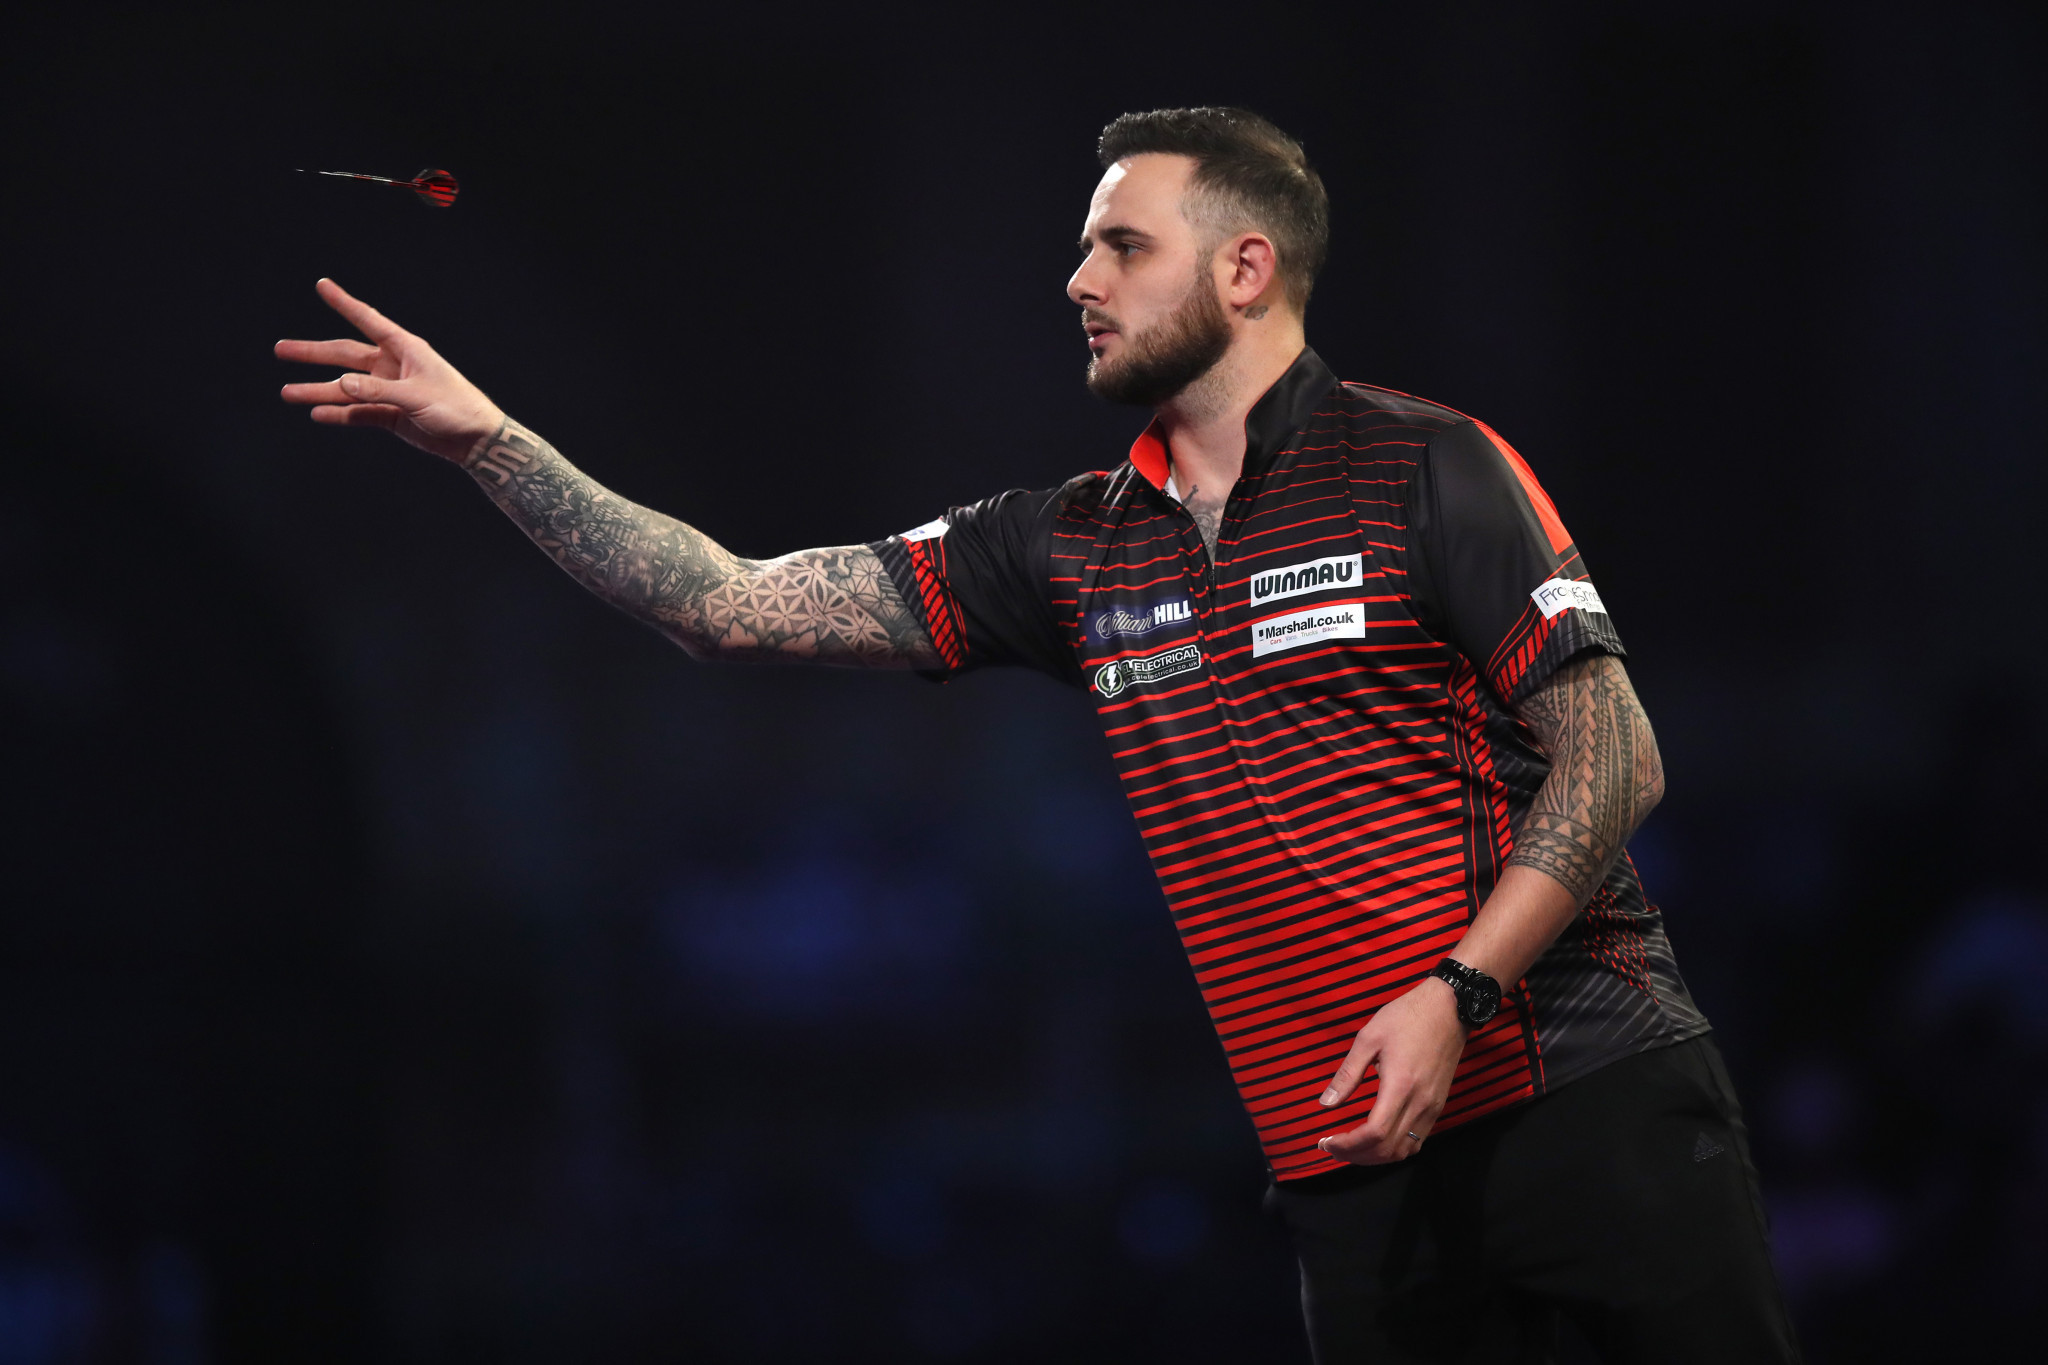 Three-set contests and seeds beaten on eighth day of PDC World Darts Championship